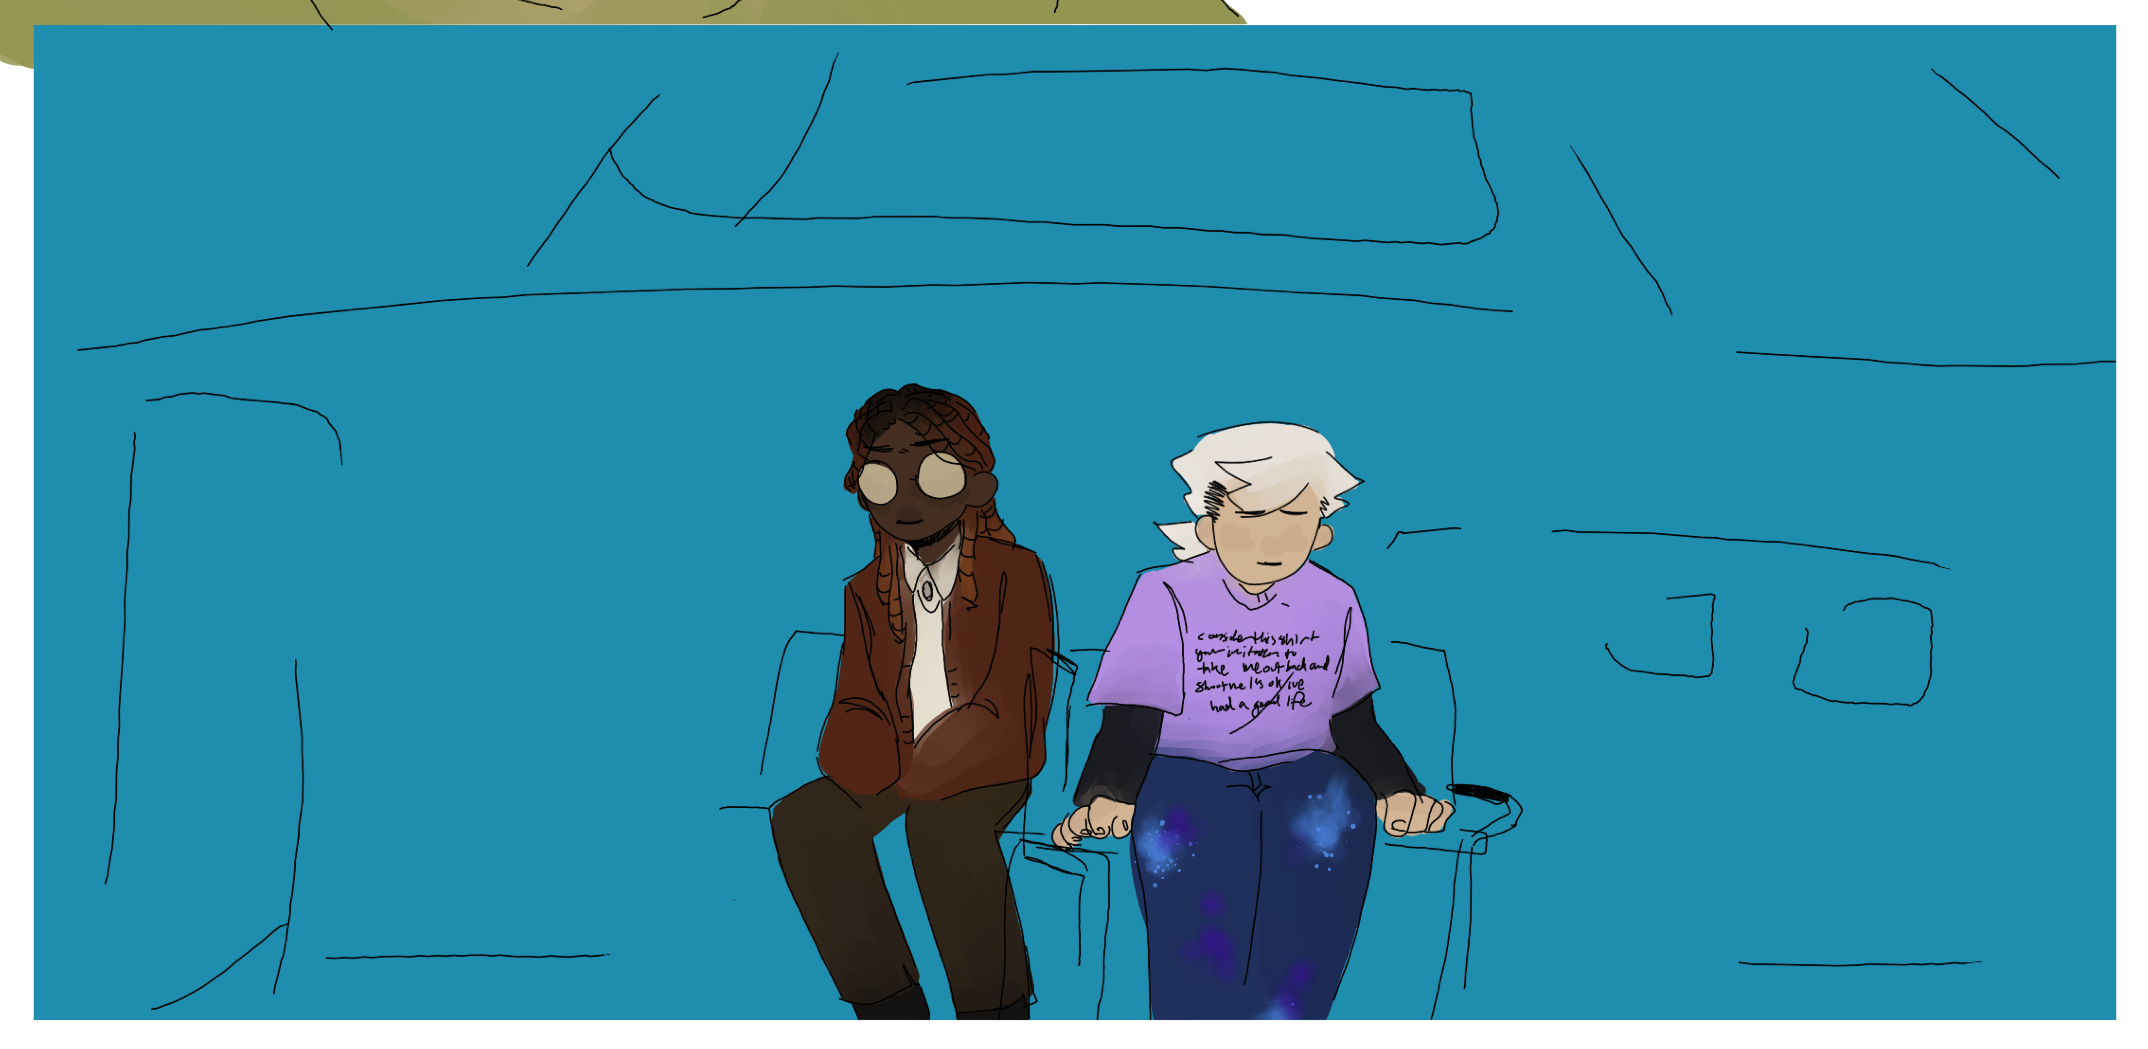 a thumbnail for the comic Level Junction which shows the two main characters, aster and sterling, sitting next to one another on a bench.